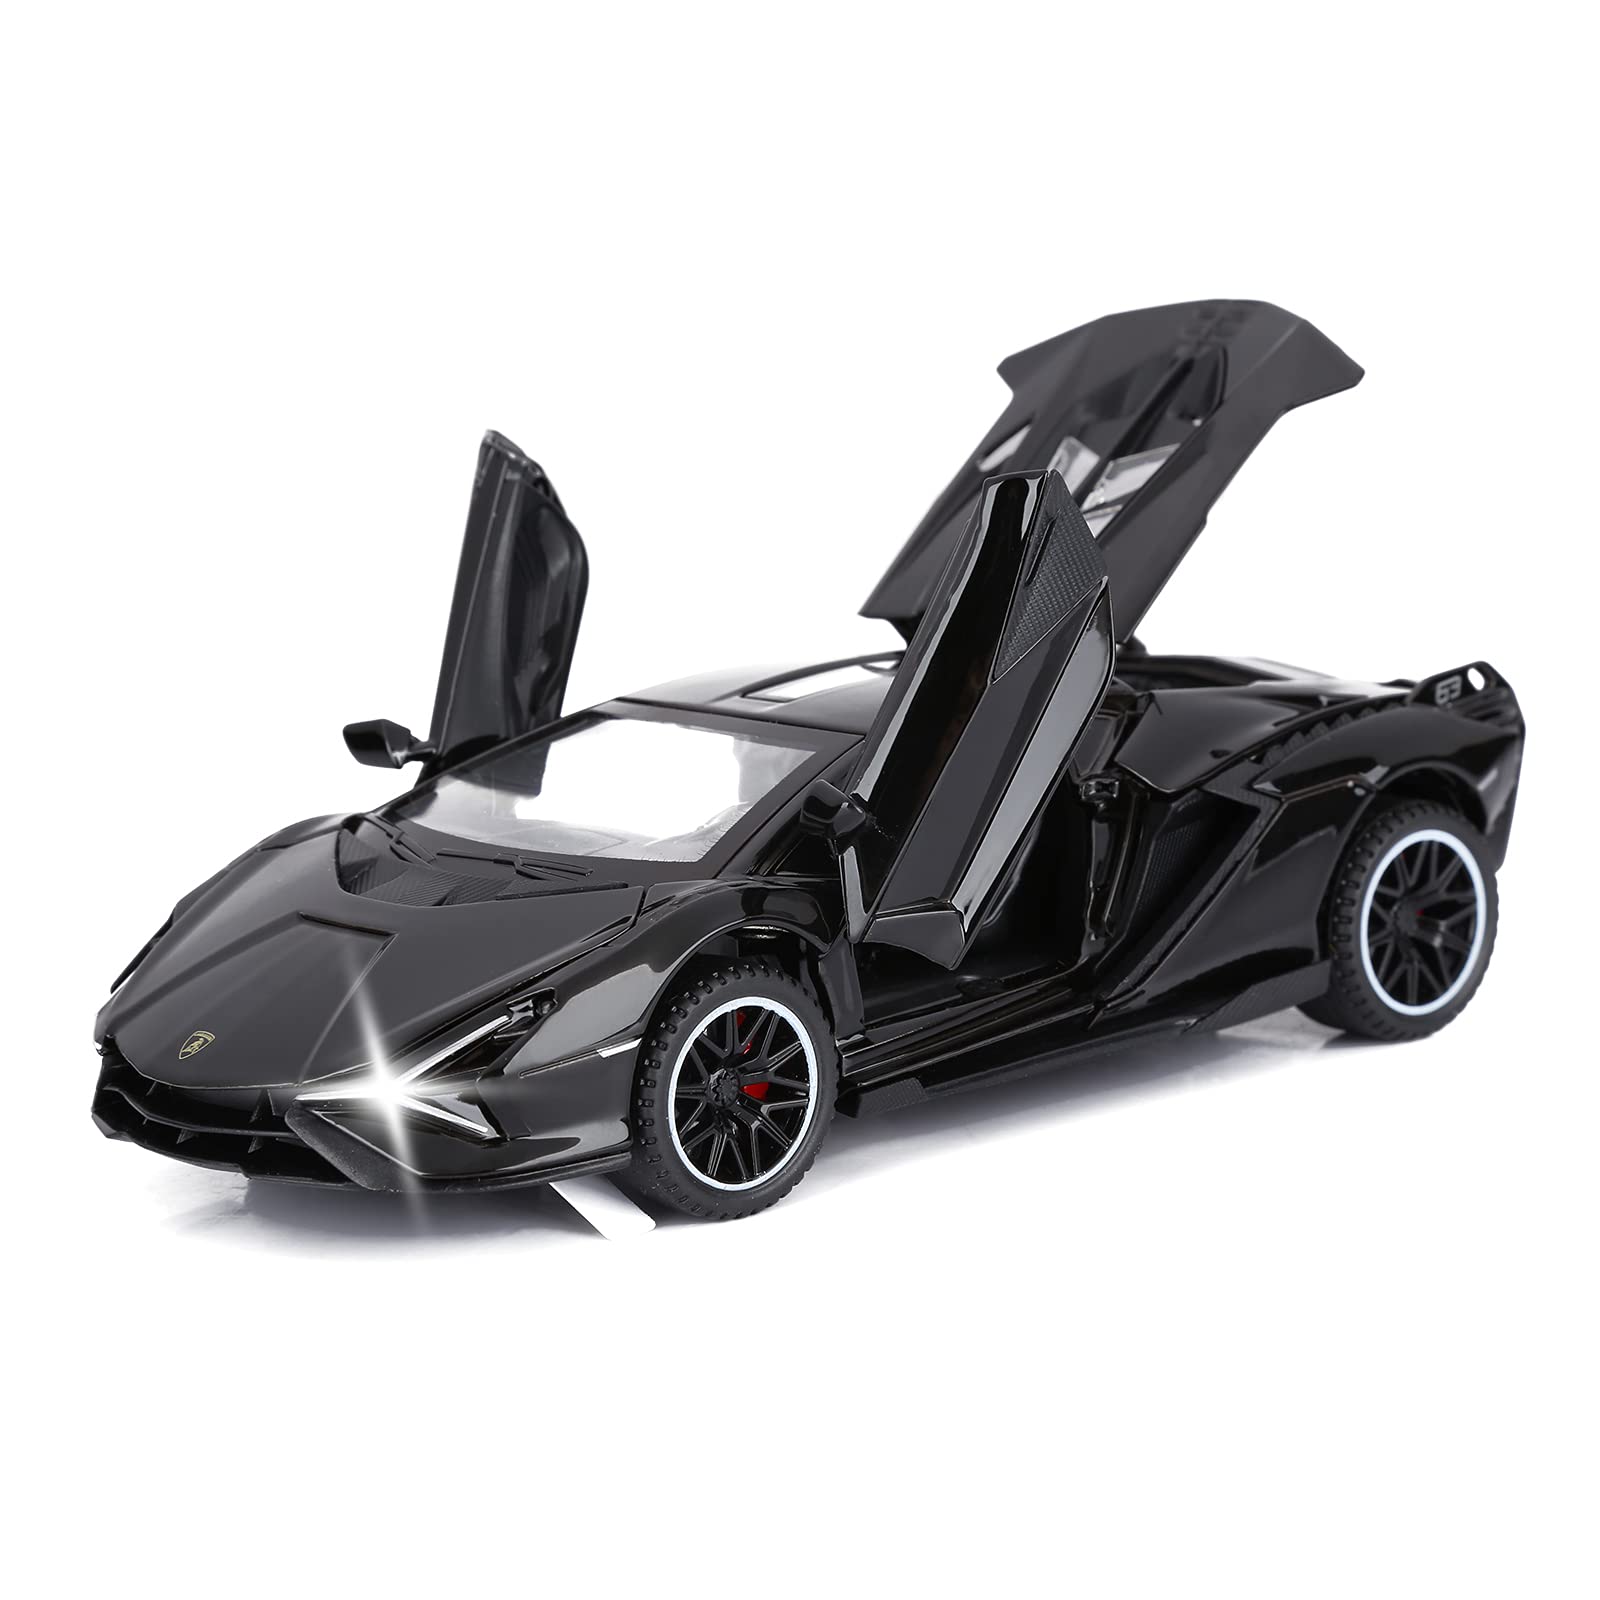 SASBSC Toy Cars Lambo Sian FKP3 Metal Model Car with Light and Sound Pull Back Toy Car for Boys Age 3 + Year Old (Black)